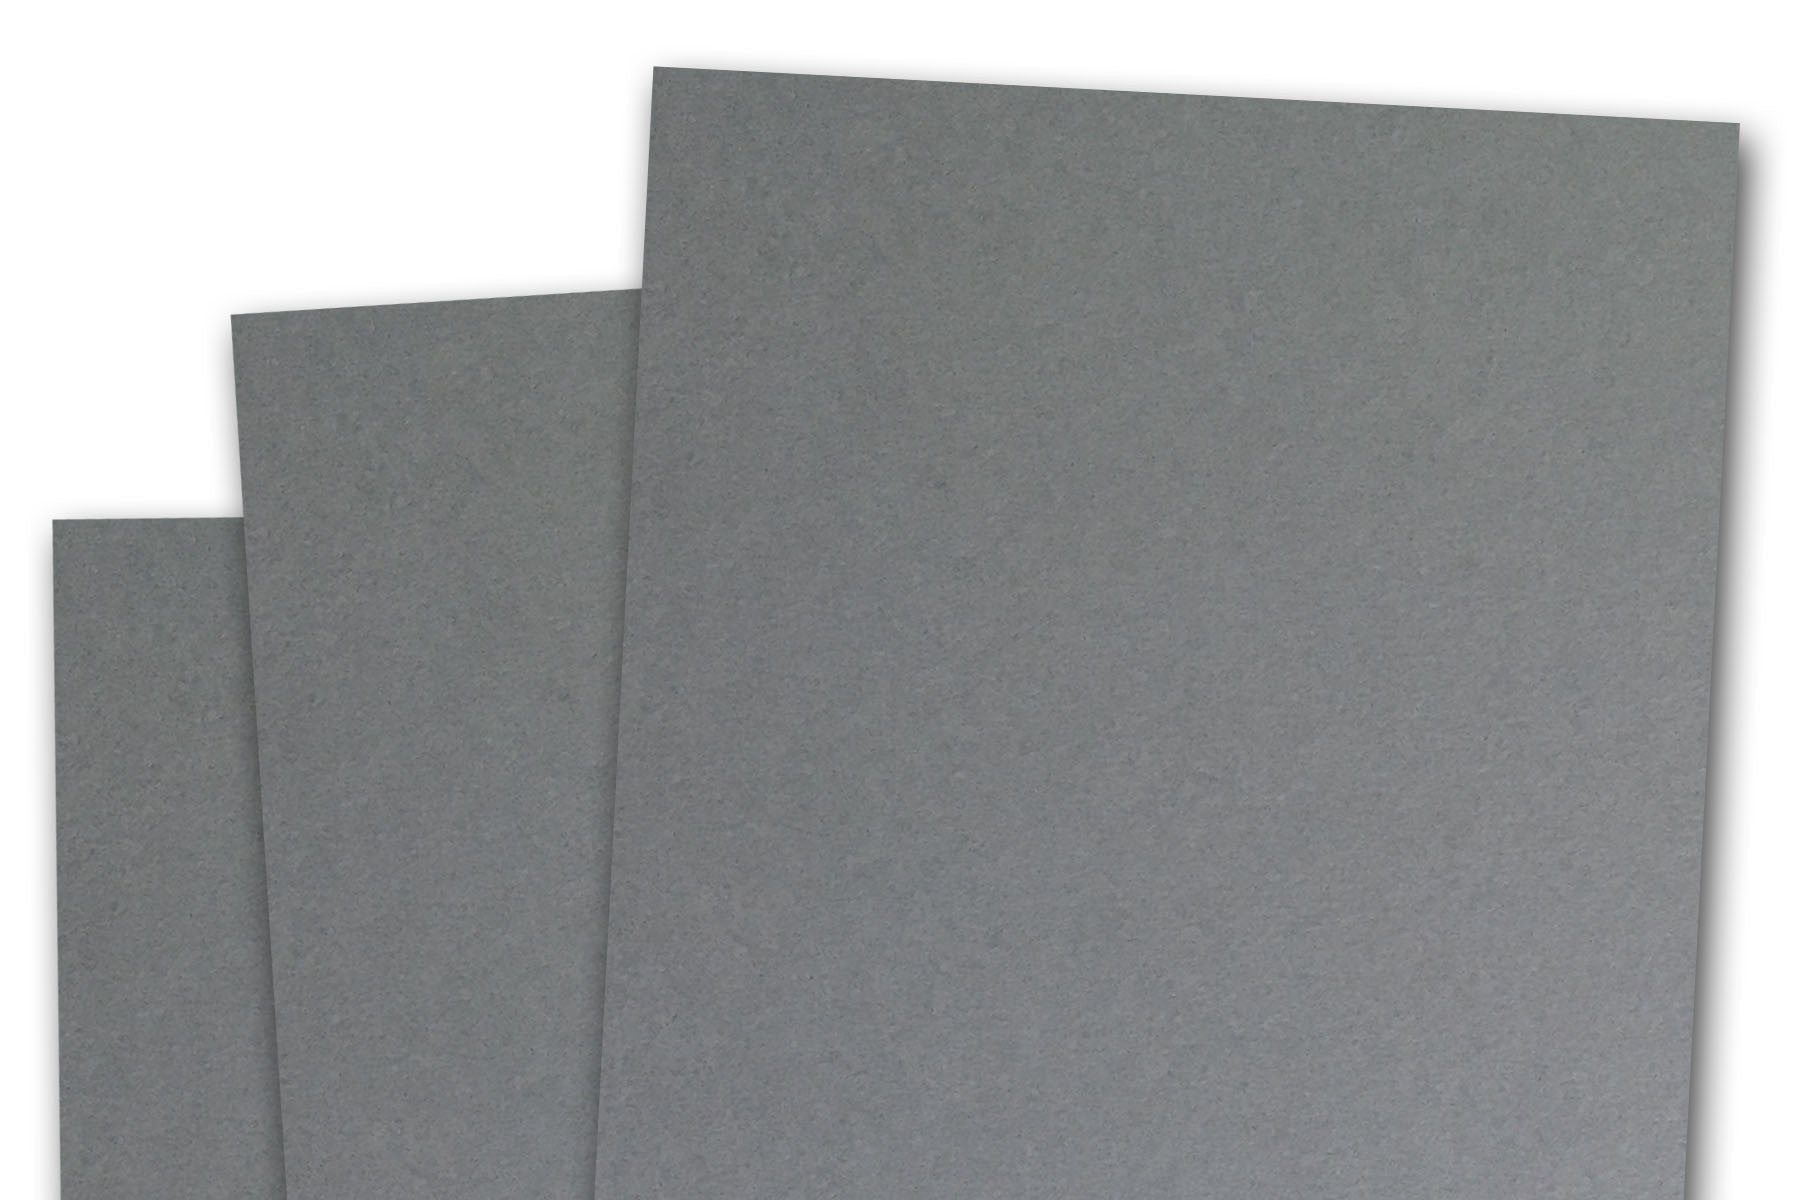 Clearance] BASIS COLORS - 8.5 x 11 PAPER - Ivory - 28/70 TEXT